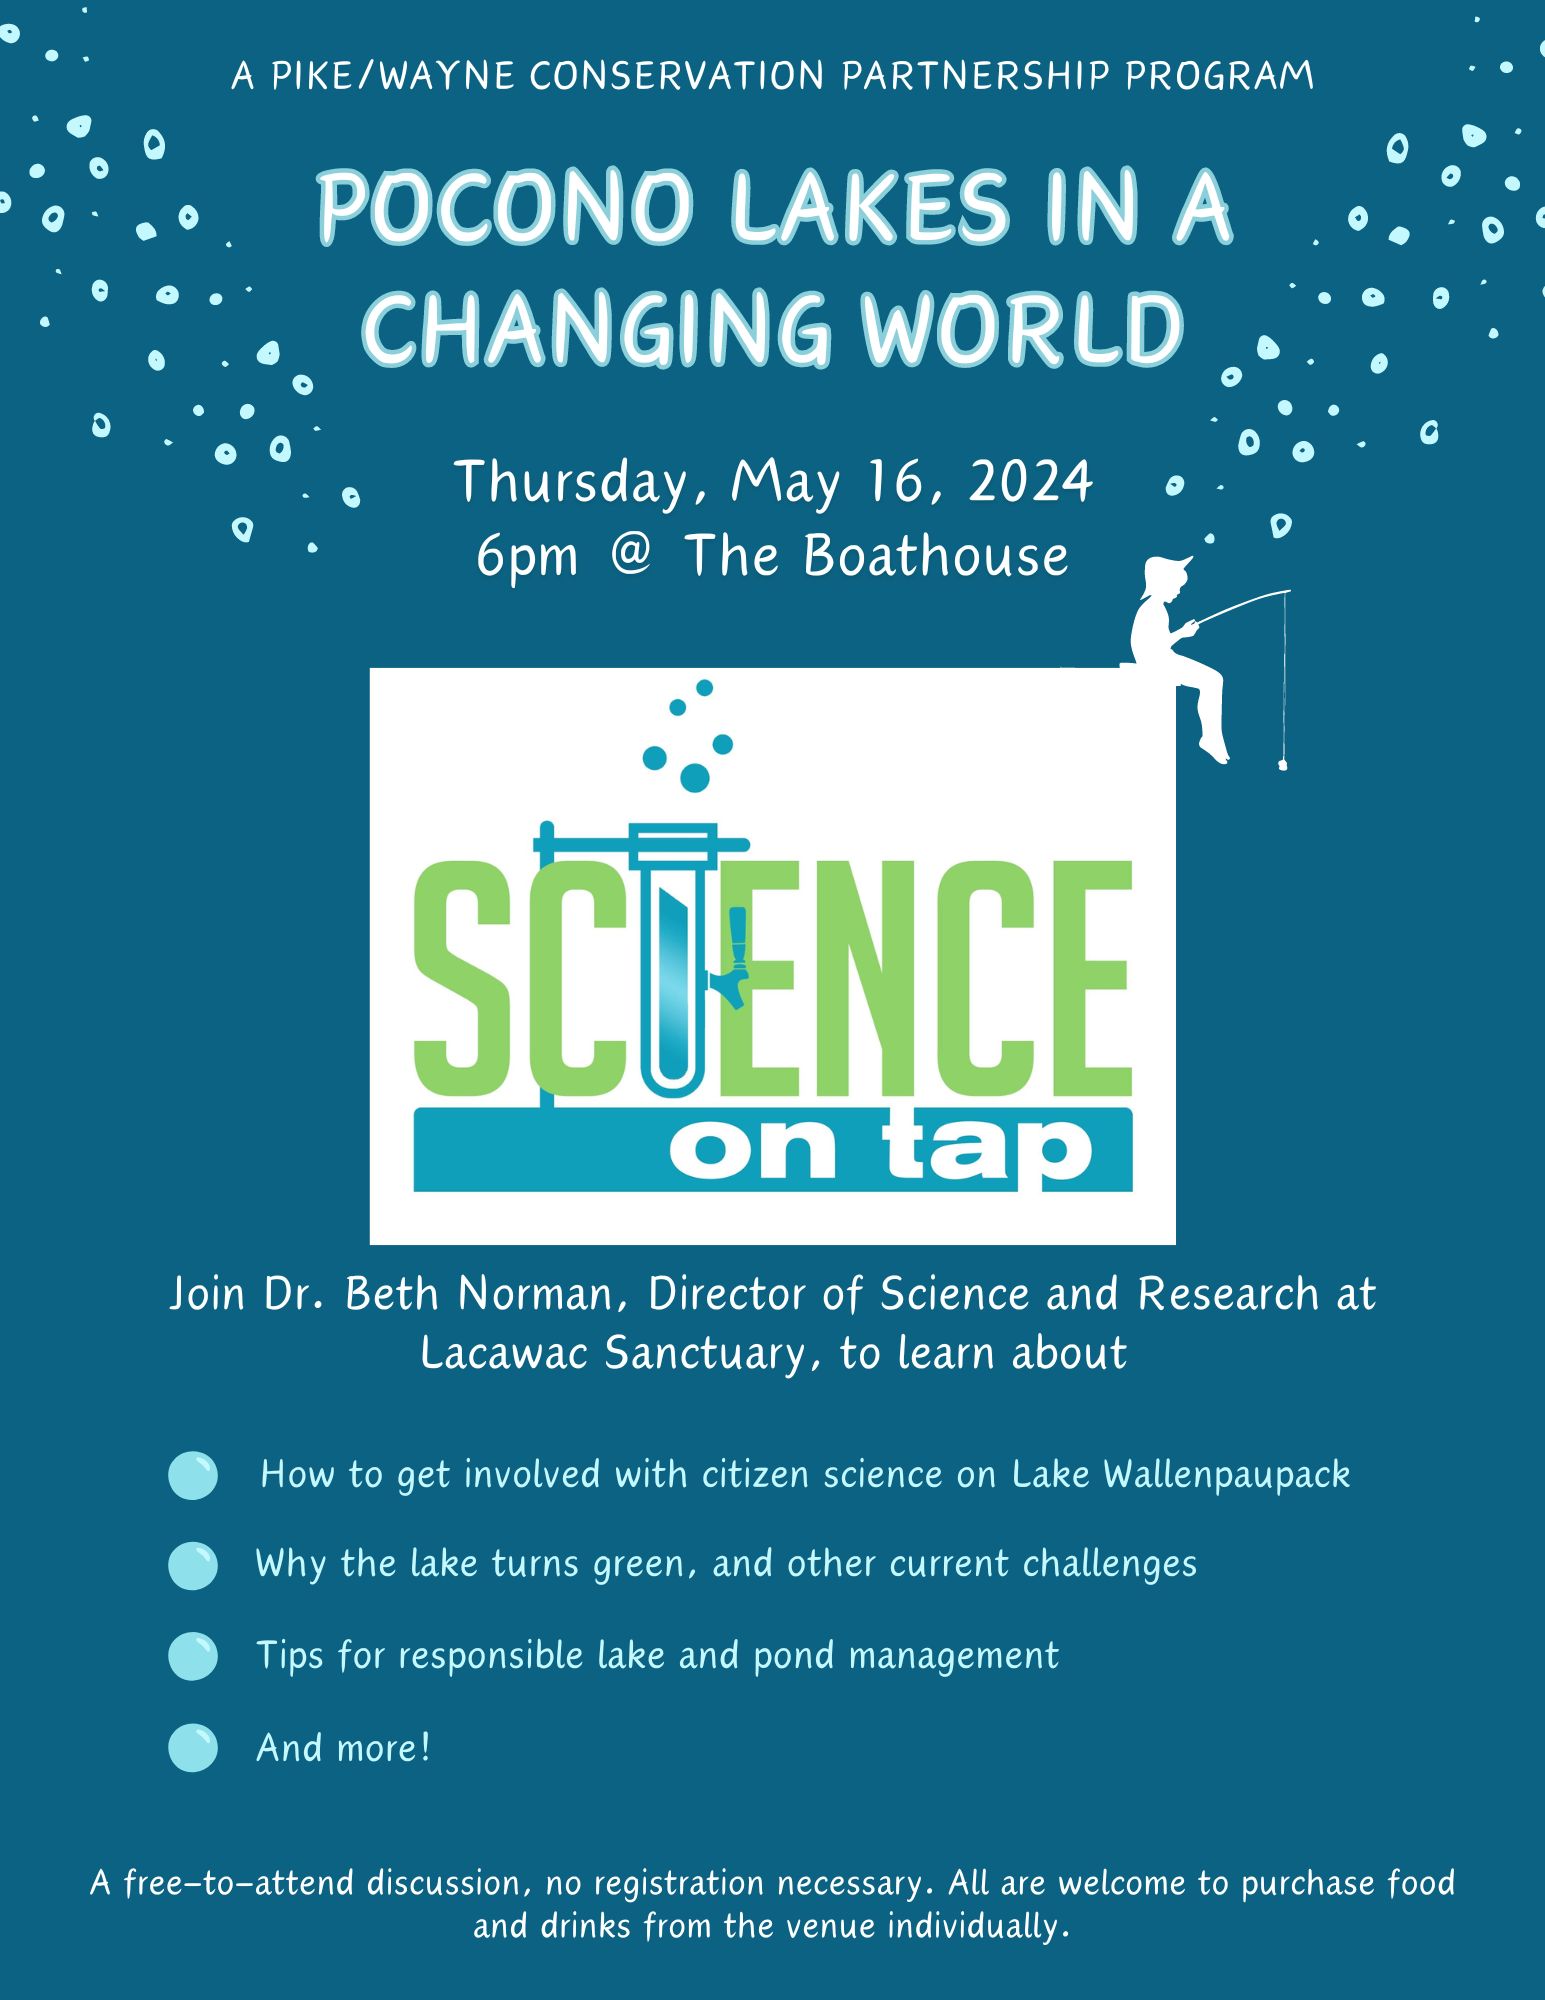 A flyer for Science on Tap: Pocono Lakes in a Changing World" with the text "A Pike/Wayne Conservation Partnership Program, Thursday, May 16, 2024 at 6pm @ The Boathouse. Join Dr. Beth Norman, Director of Science and Research at Lacawac Sanctuary, to learn about how to get involved with citizen science on Lake Wallenpaupack; why the lake turns green, and other current challenges; Tips for responsible lake and pond management; and more! A free-to-attend discussion, no registration necessary. All are welcome to purchase food and drinks from the venue individually."